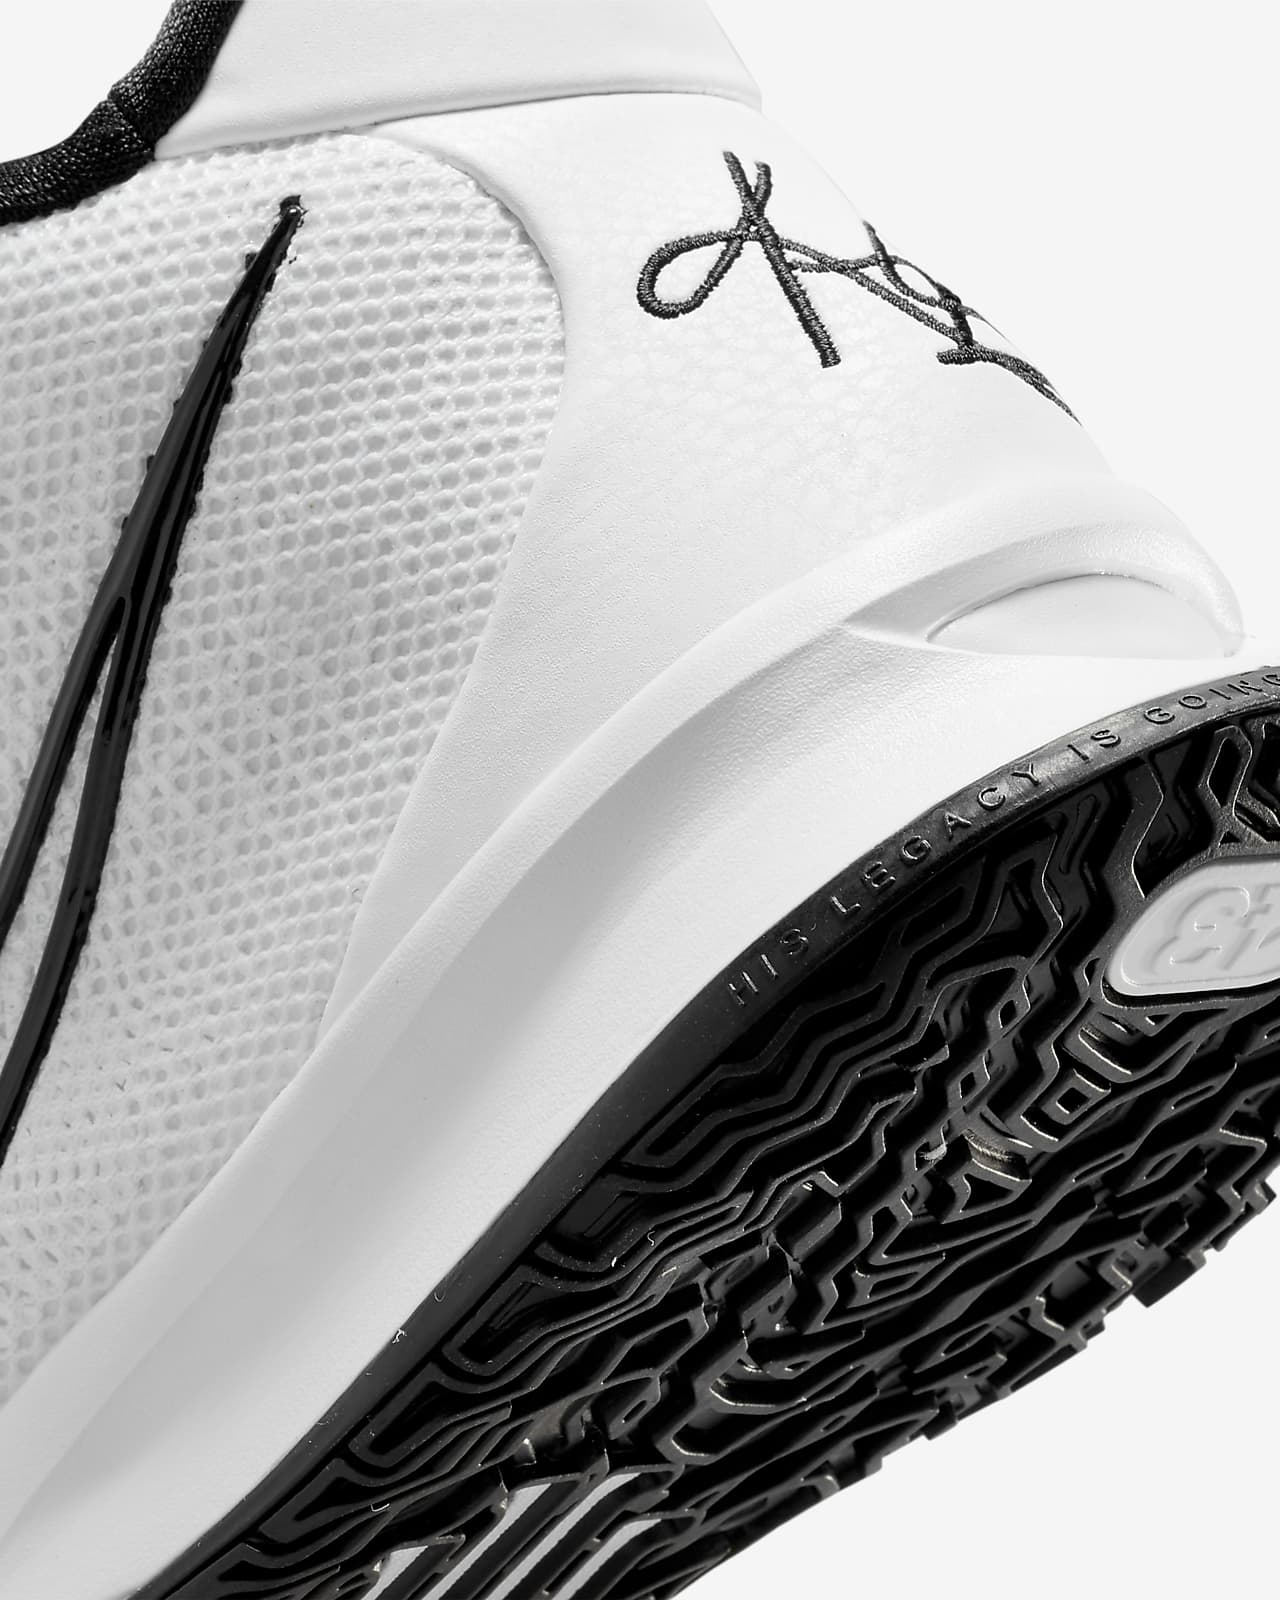 kyrie shoes 2018 white